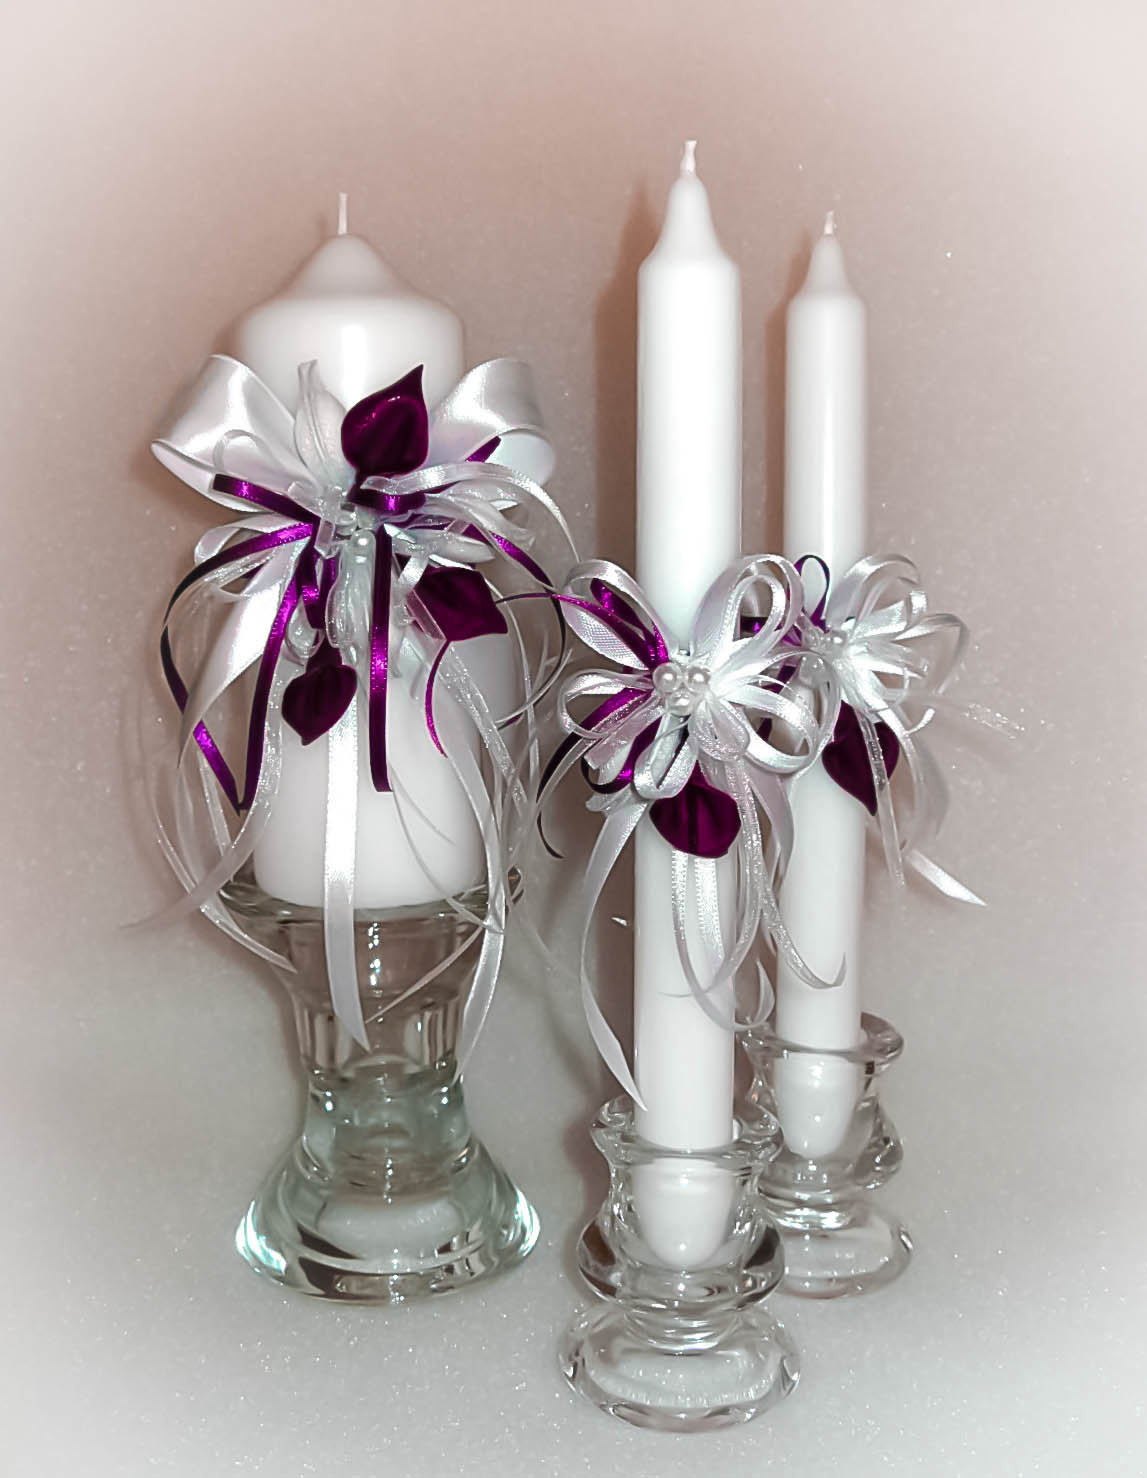 Handmade Wedding Unity Candles "deep Purple Calla Lilies", Pillar Candle, Taper Candles, Personalized Candles, Unity